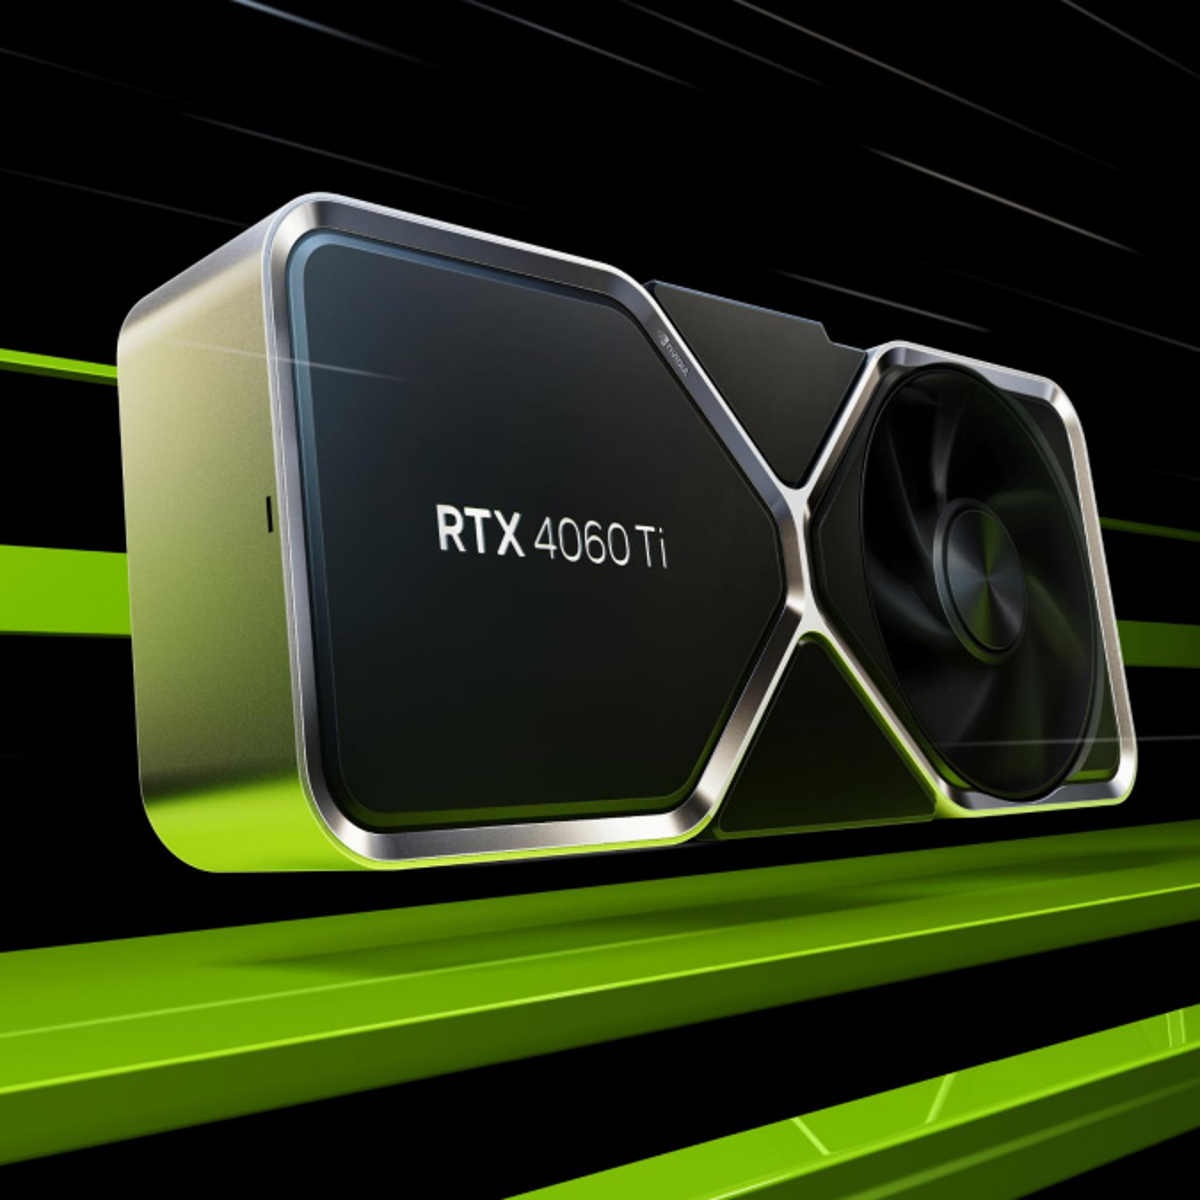 Nvidia GeForce RTX 4060 Ti 8GB review: the disappointment is real - Eurogamer.net (Picture 1)